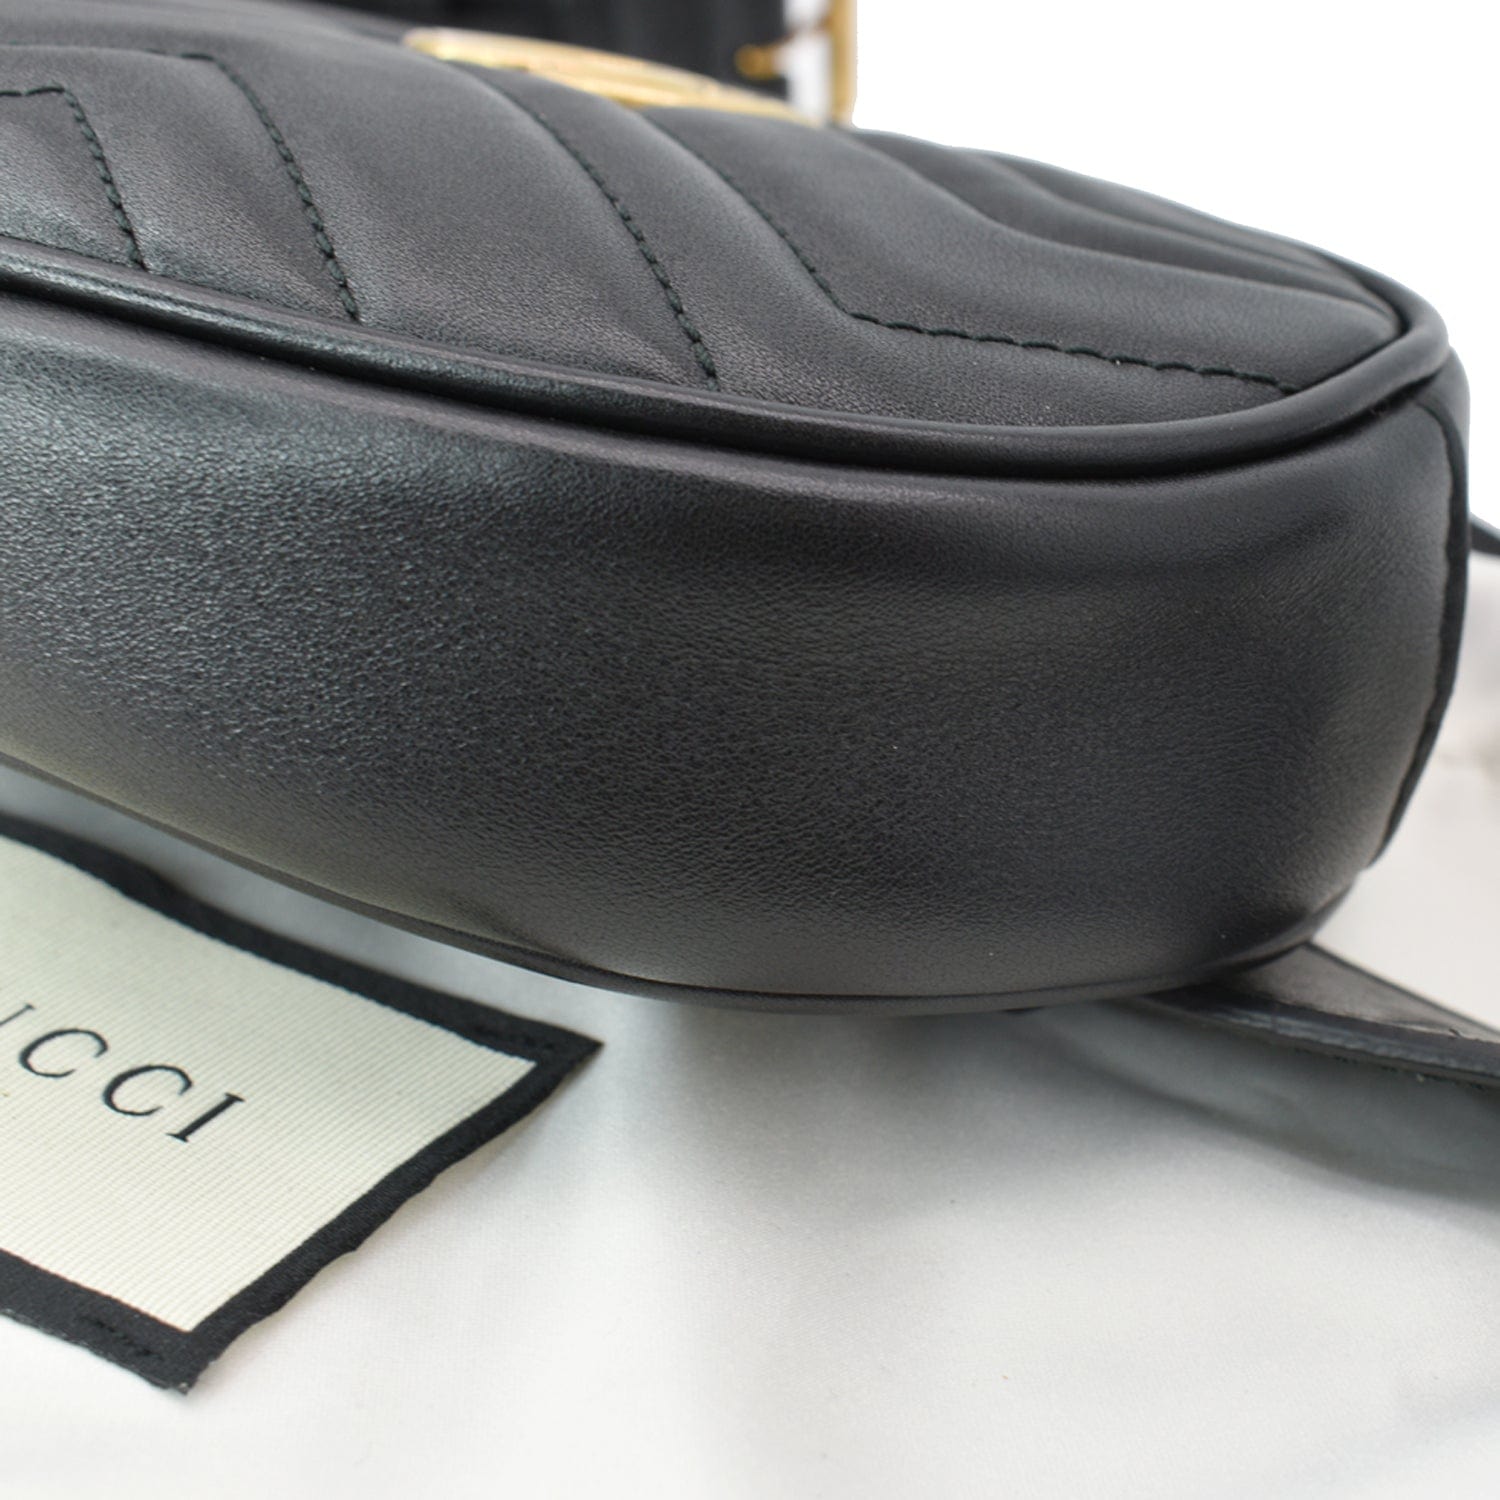 Gucci Matelasse Leather GG Marmont Belt Bag - Size 34 / 85 (SHF-23400) –  LuxeDH